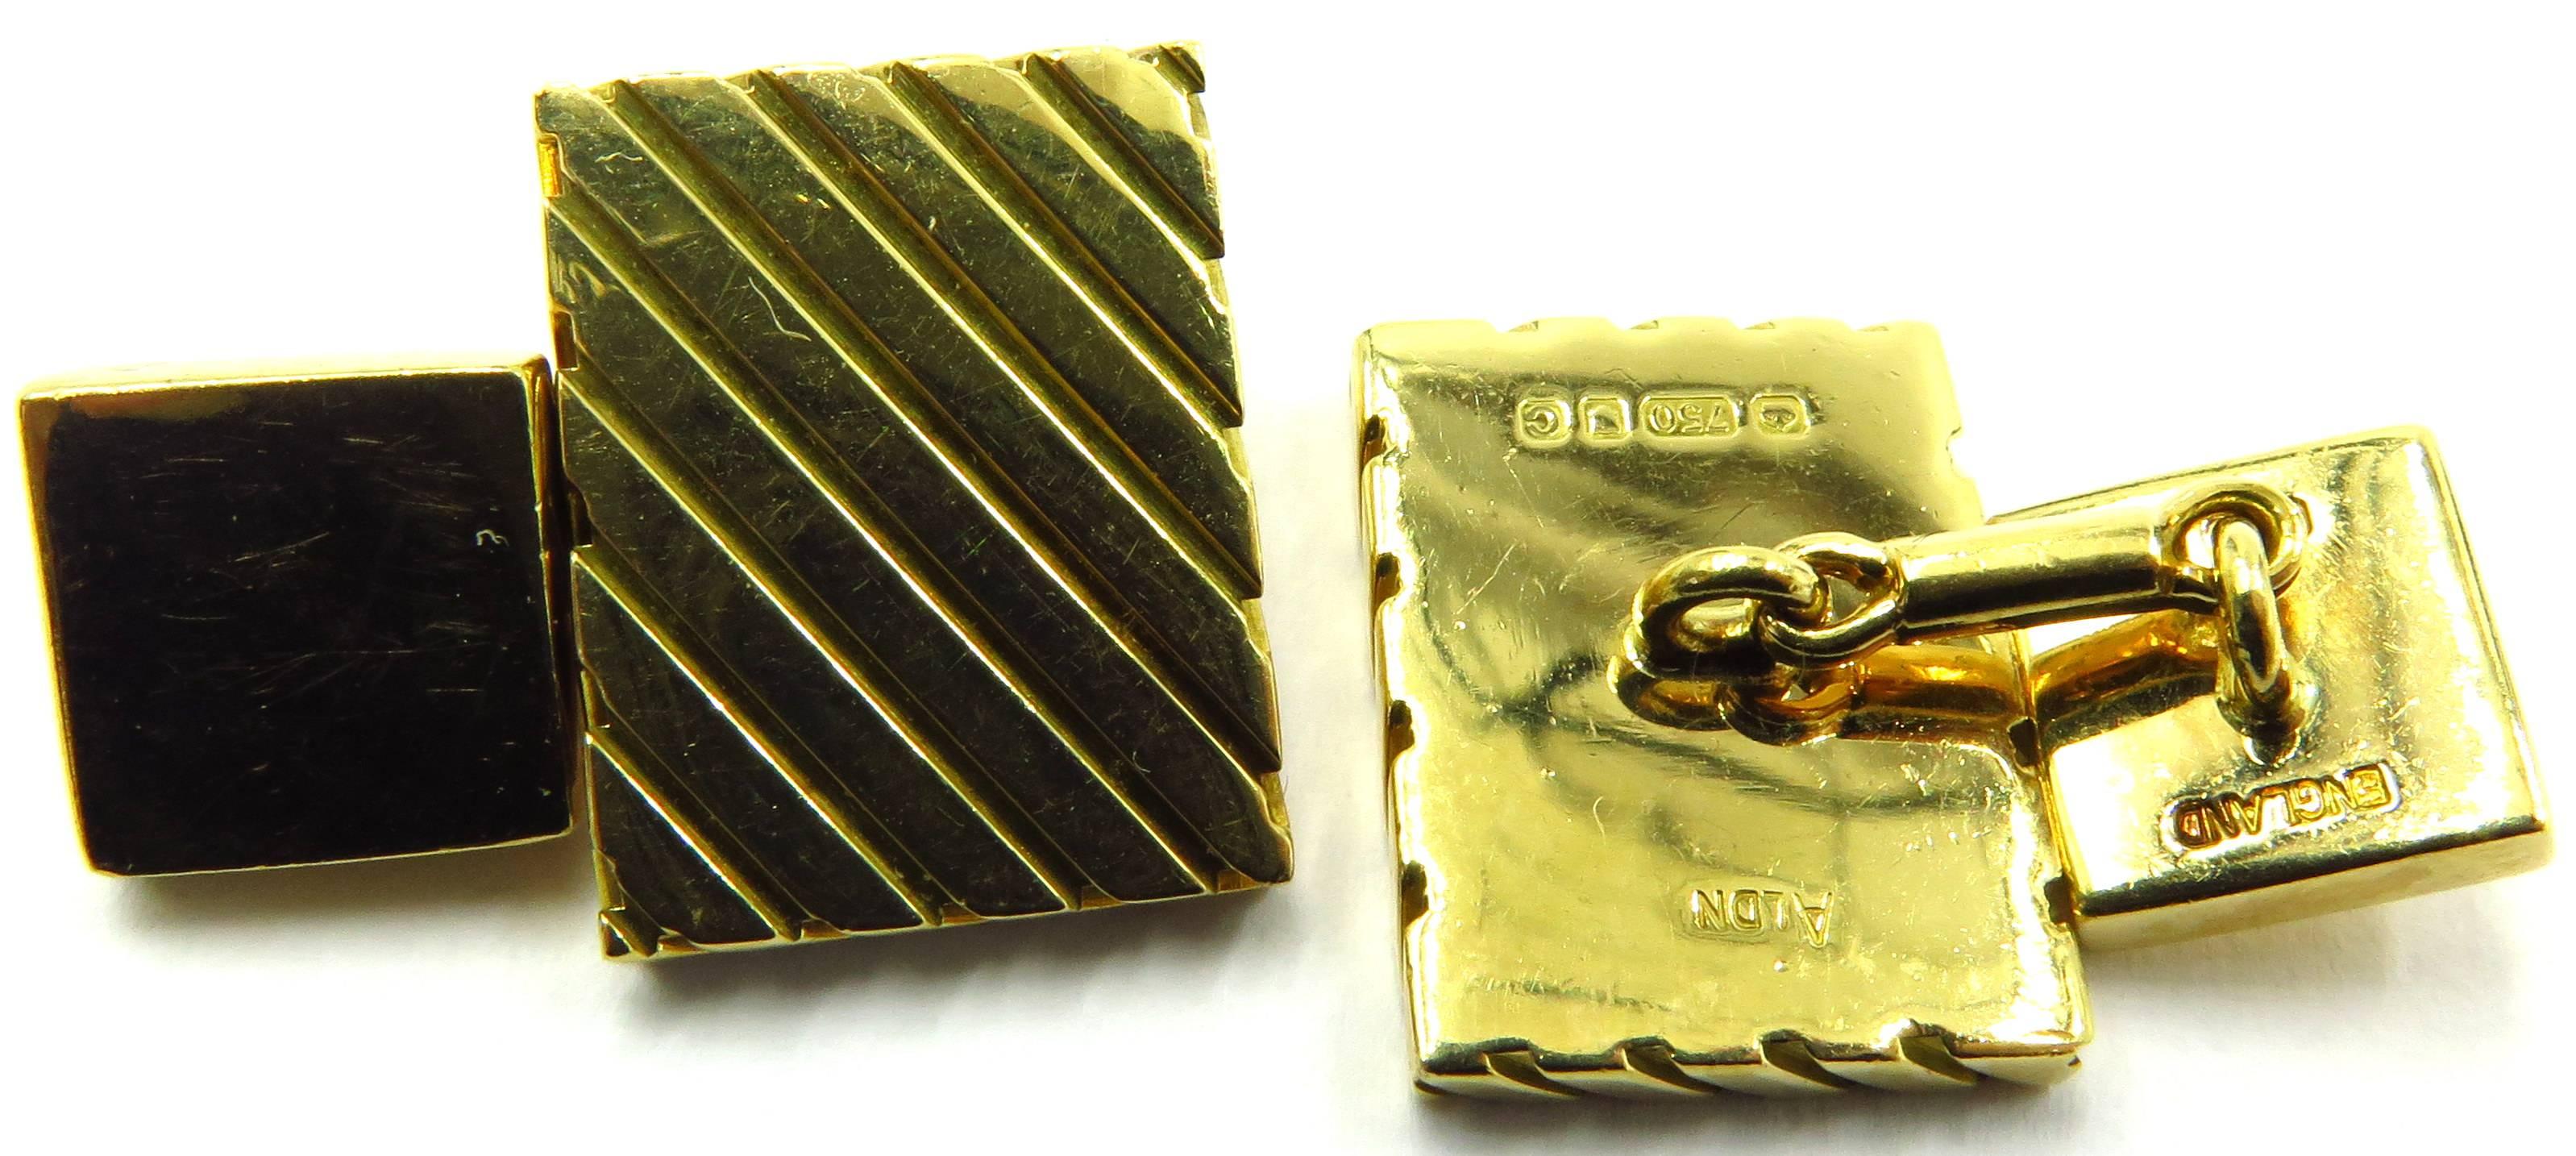 These are very heavy and well made 18k cufflinks. The backs have hallmarks and are signed Asprey. 
The larger rectangular section measures 11/16 inch by 1/2 inch
The square section measures 3/8 inch square
The cufflilnks weigh 30.3 grams